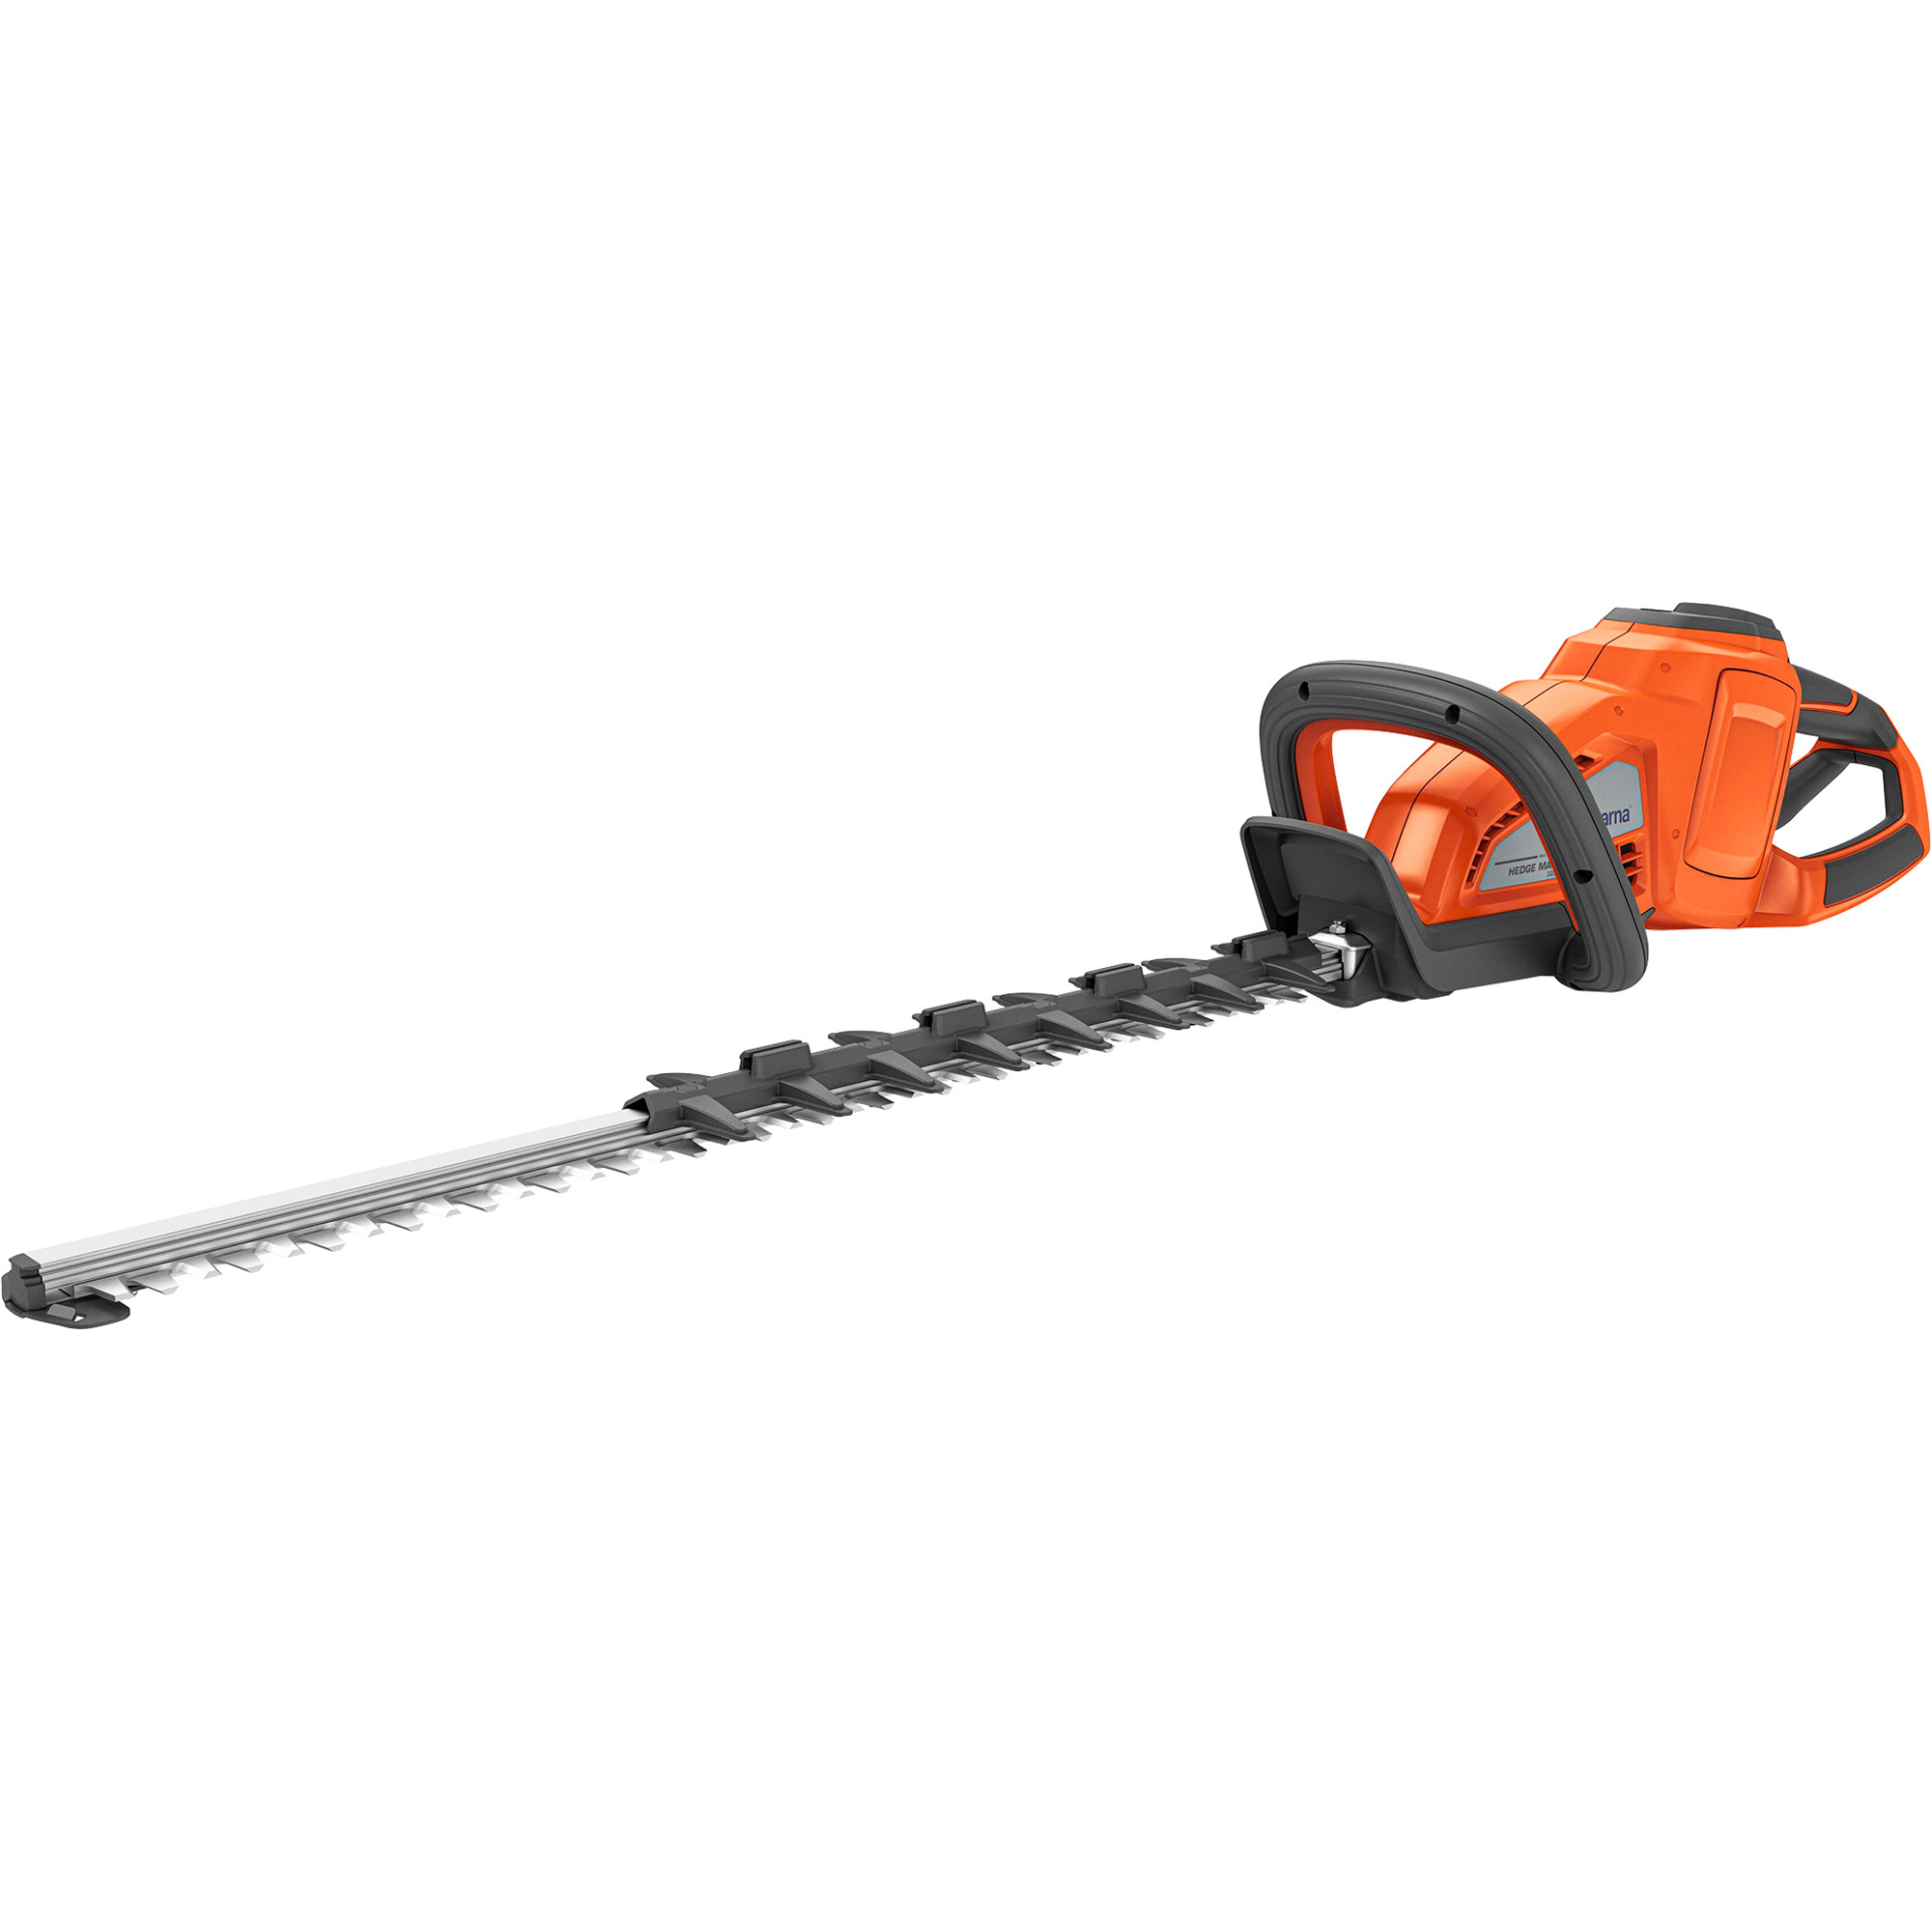 Husqvarna Hedge Master 40V Cordless Hedge Trimmer with Battery and Charger, 4 hr., Model 320IHD60